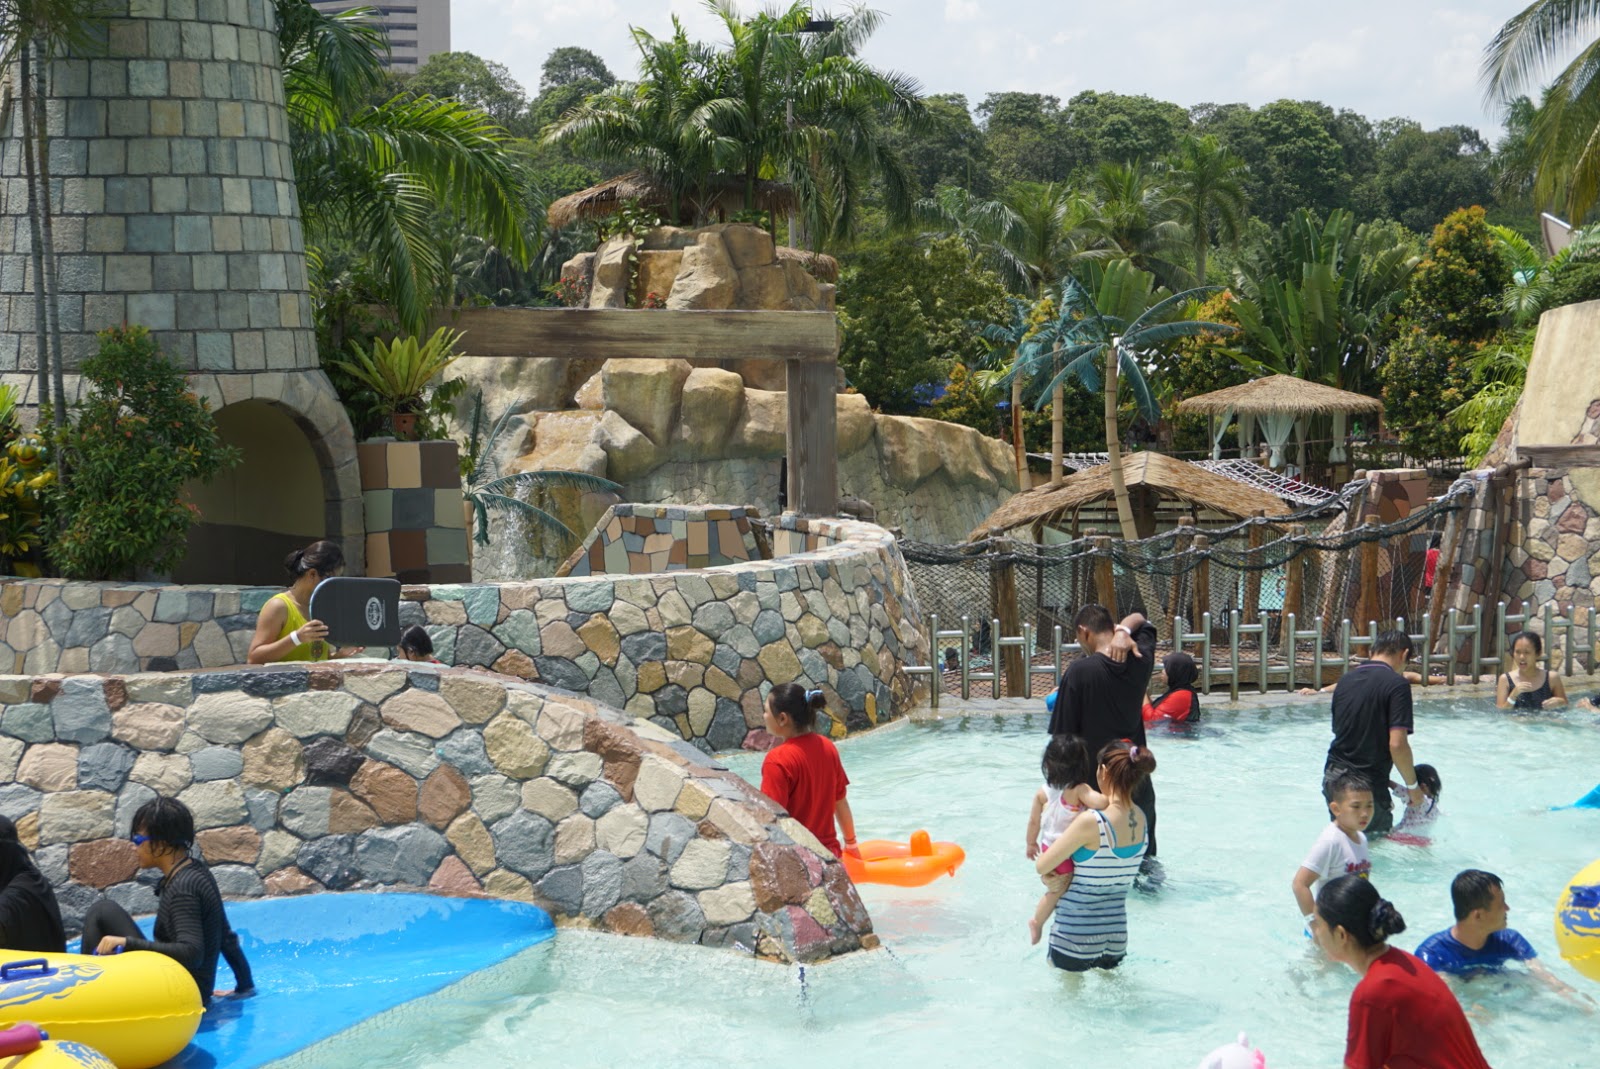 Pretty Wen's Diary: Water Park at Wet World Shah Alam